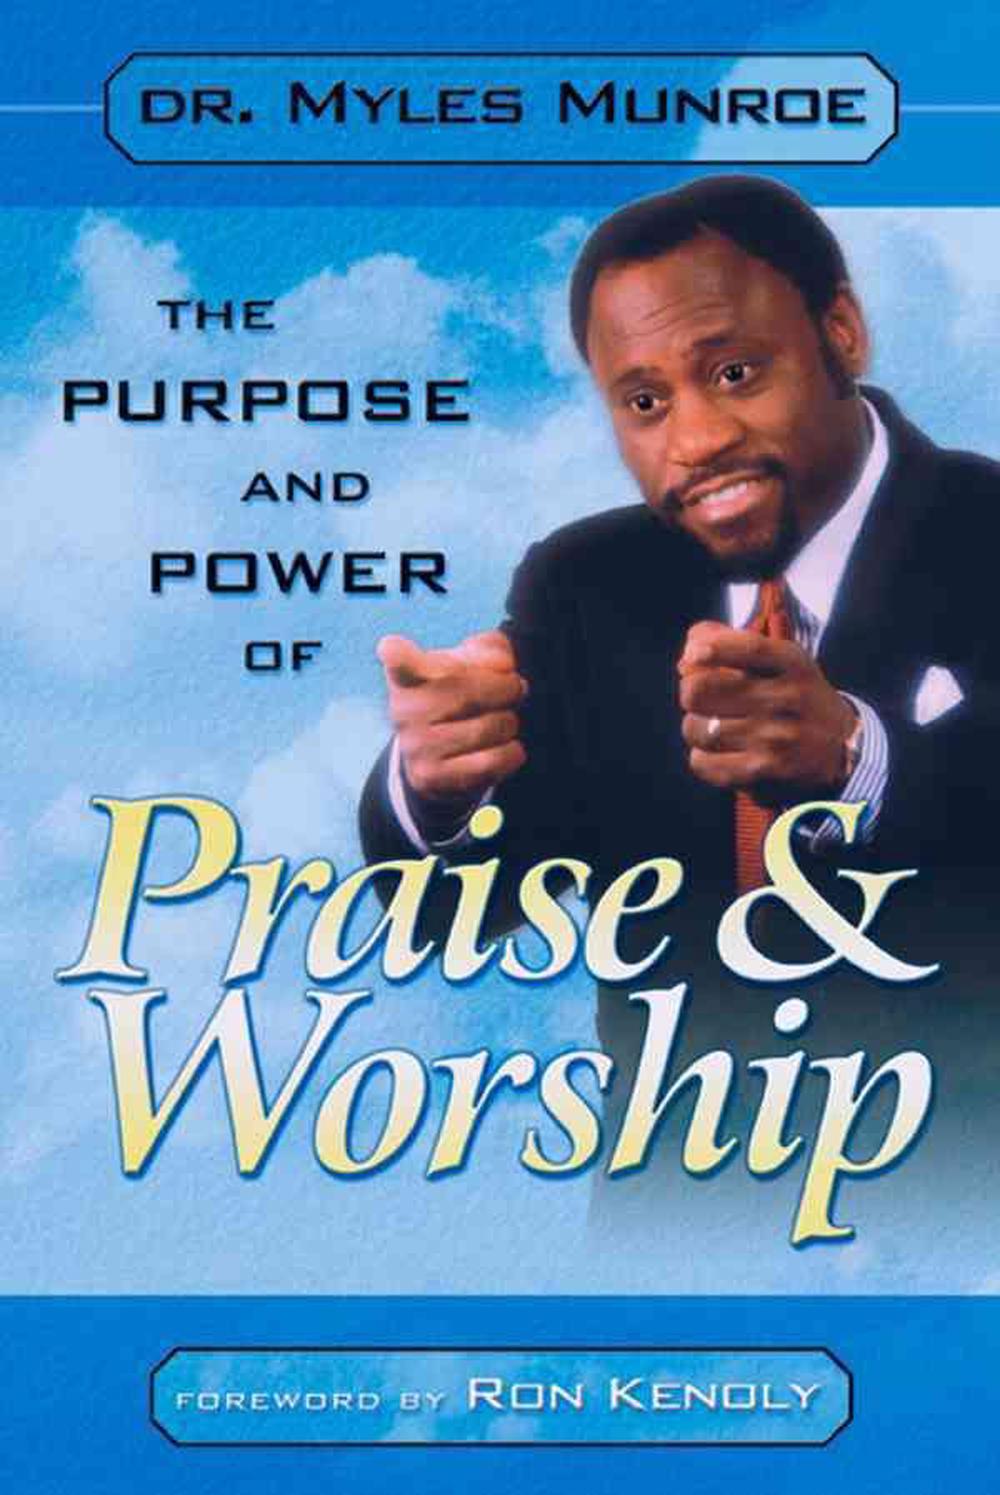 Purpose and Power of Praise & Worship by Myles Munroe